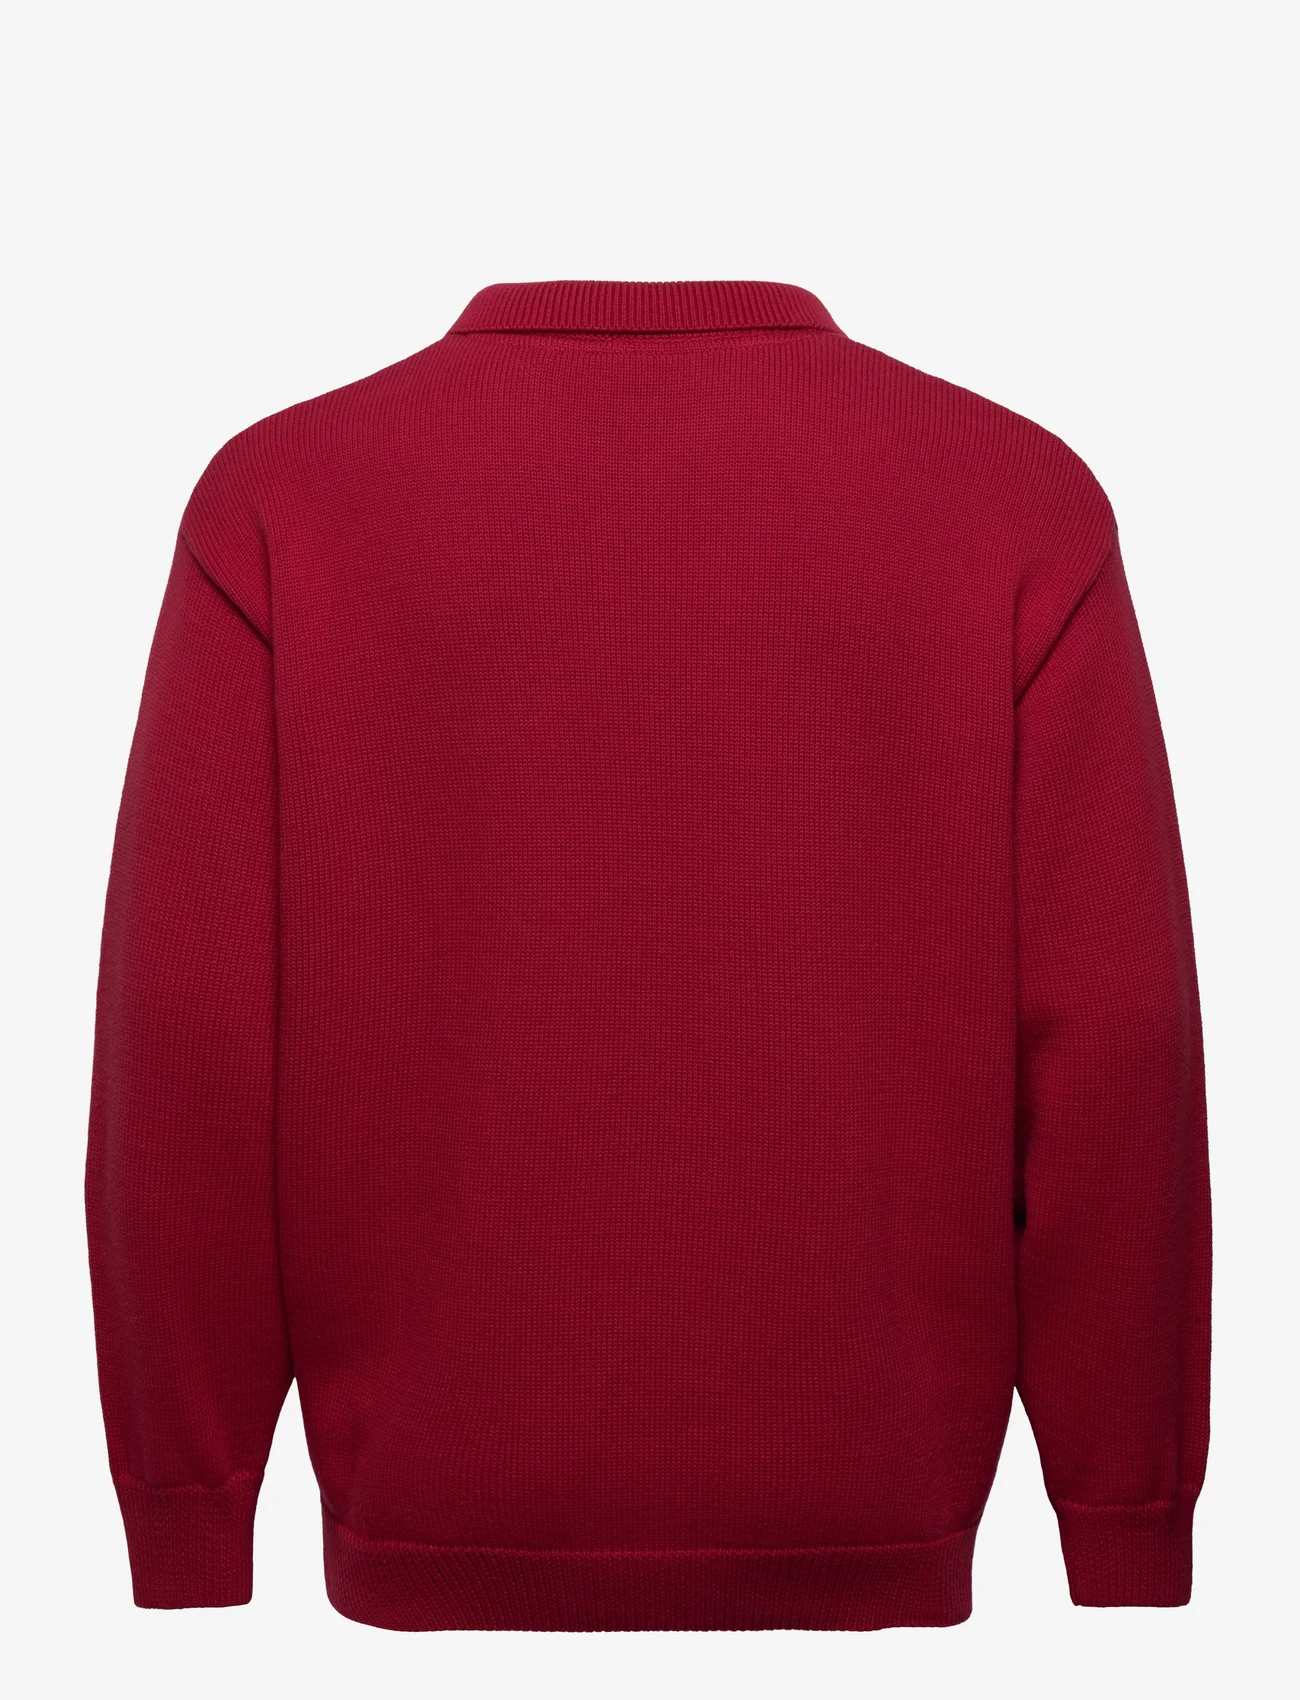 Lyle & Scott - Blousson Knitted Polo - polostrik - tunnel red - 1